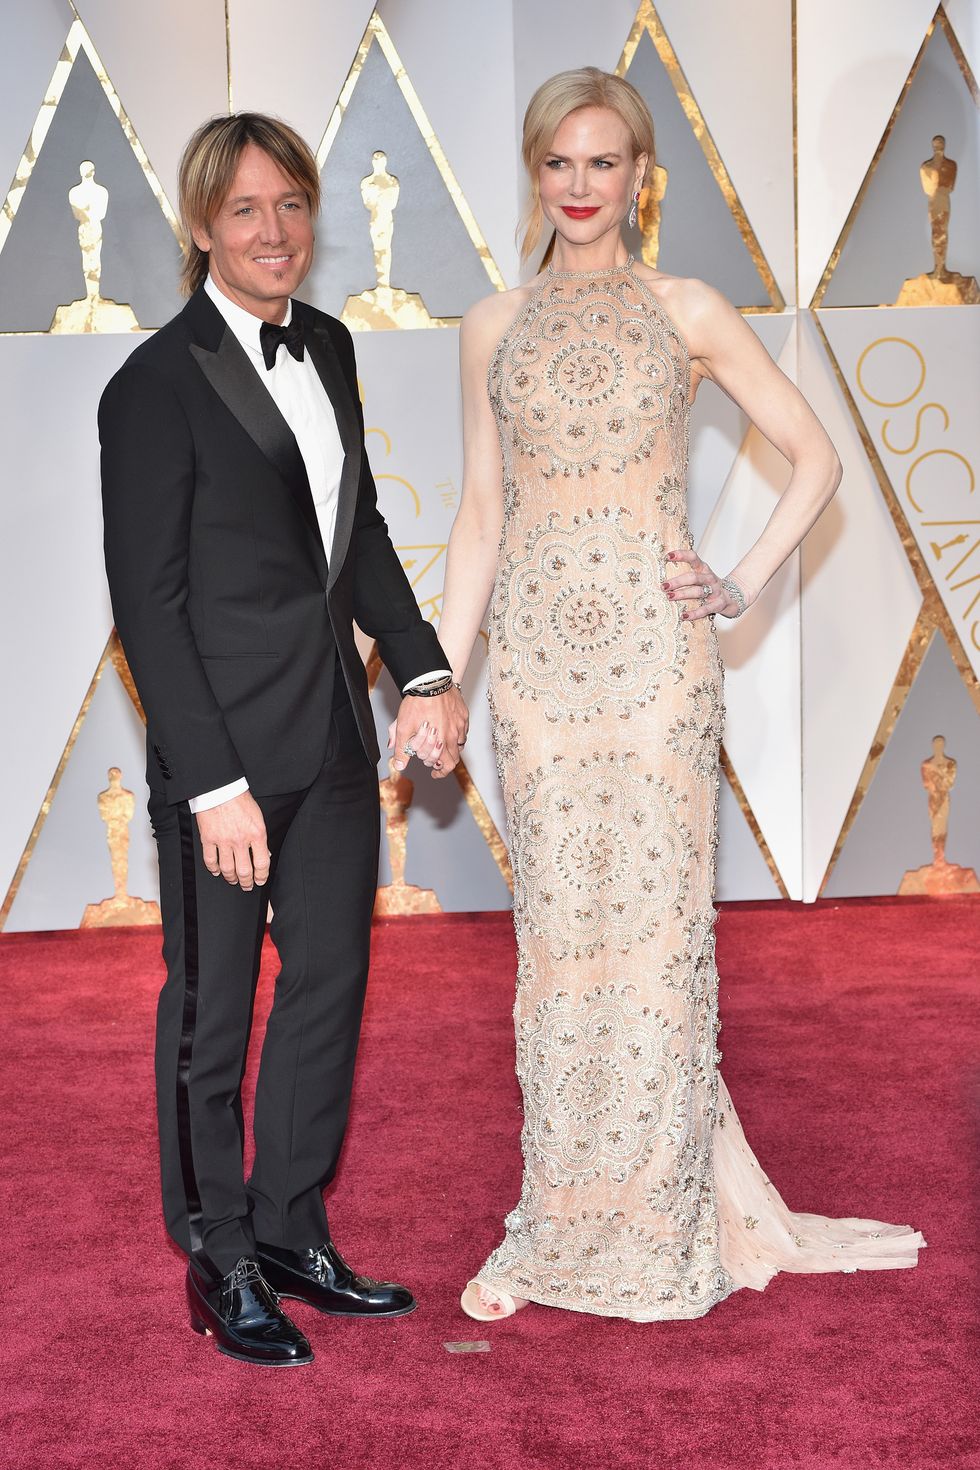 HOLLYWOOD, CA - FEBRUARY 26:  (L-R) Singer Keith Urban and actor Nicole Kidman attend the 89th Annual Academy Awards at Hollywood &amp; Highland Center on February 26, 2017 in Hollywood, California.  (Photo by Kevin Mazur/Getty Images)